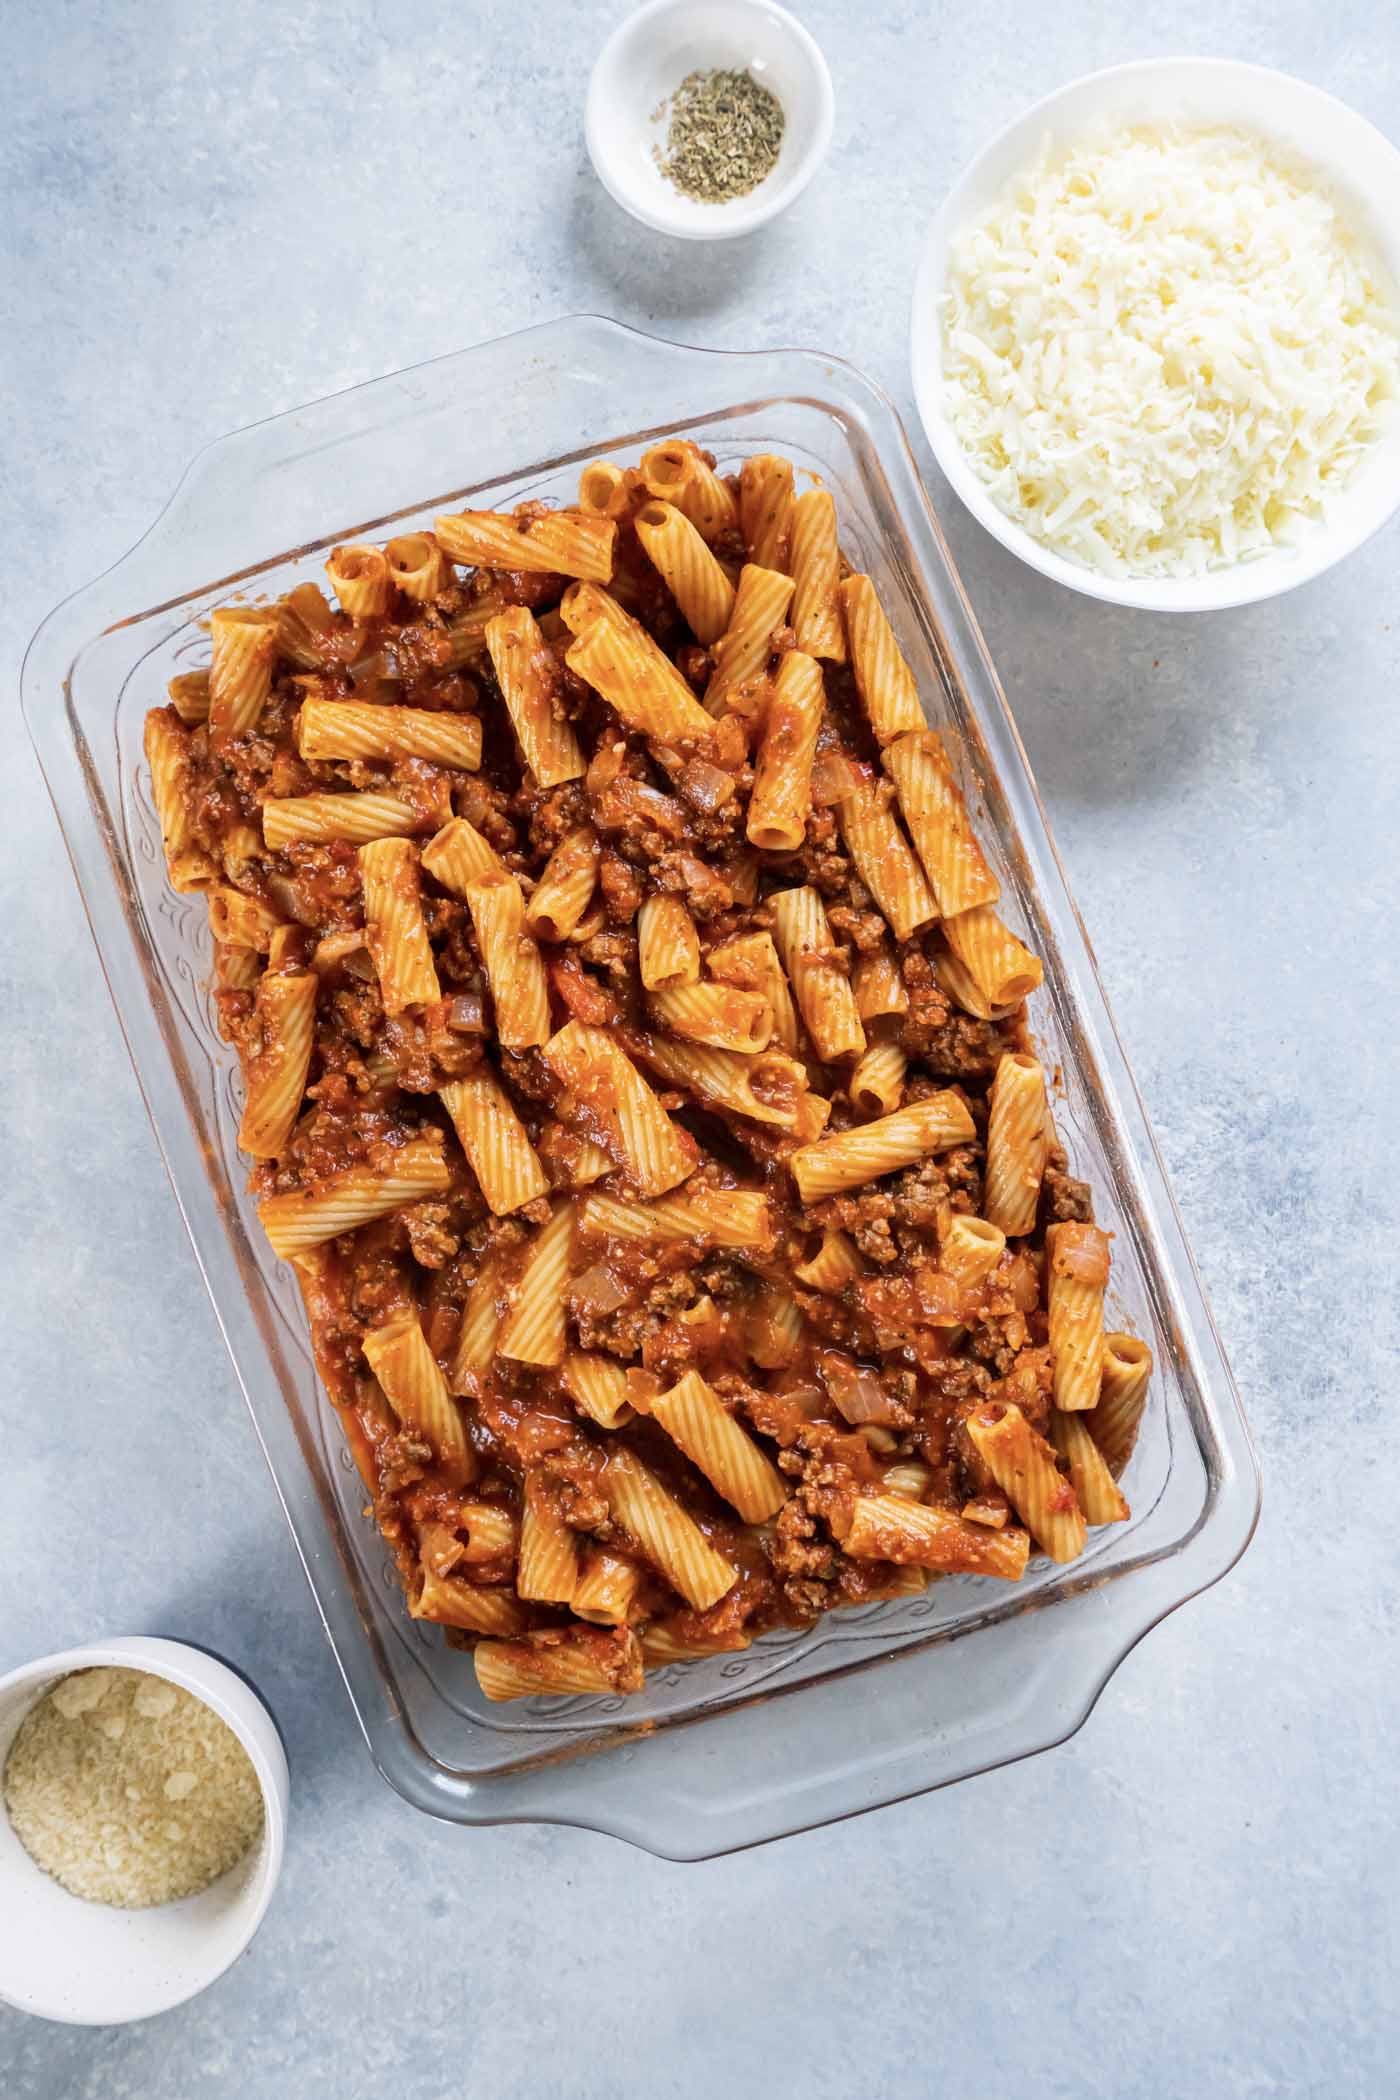 Rigatoni with meat sauce in baking dish.